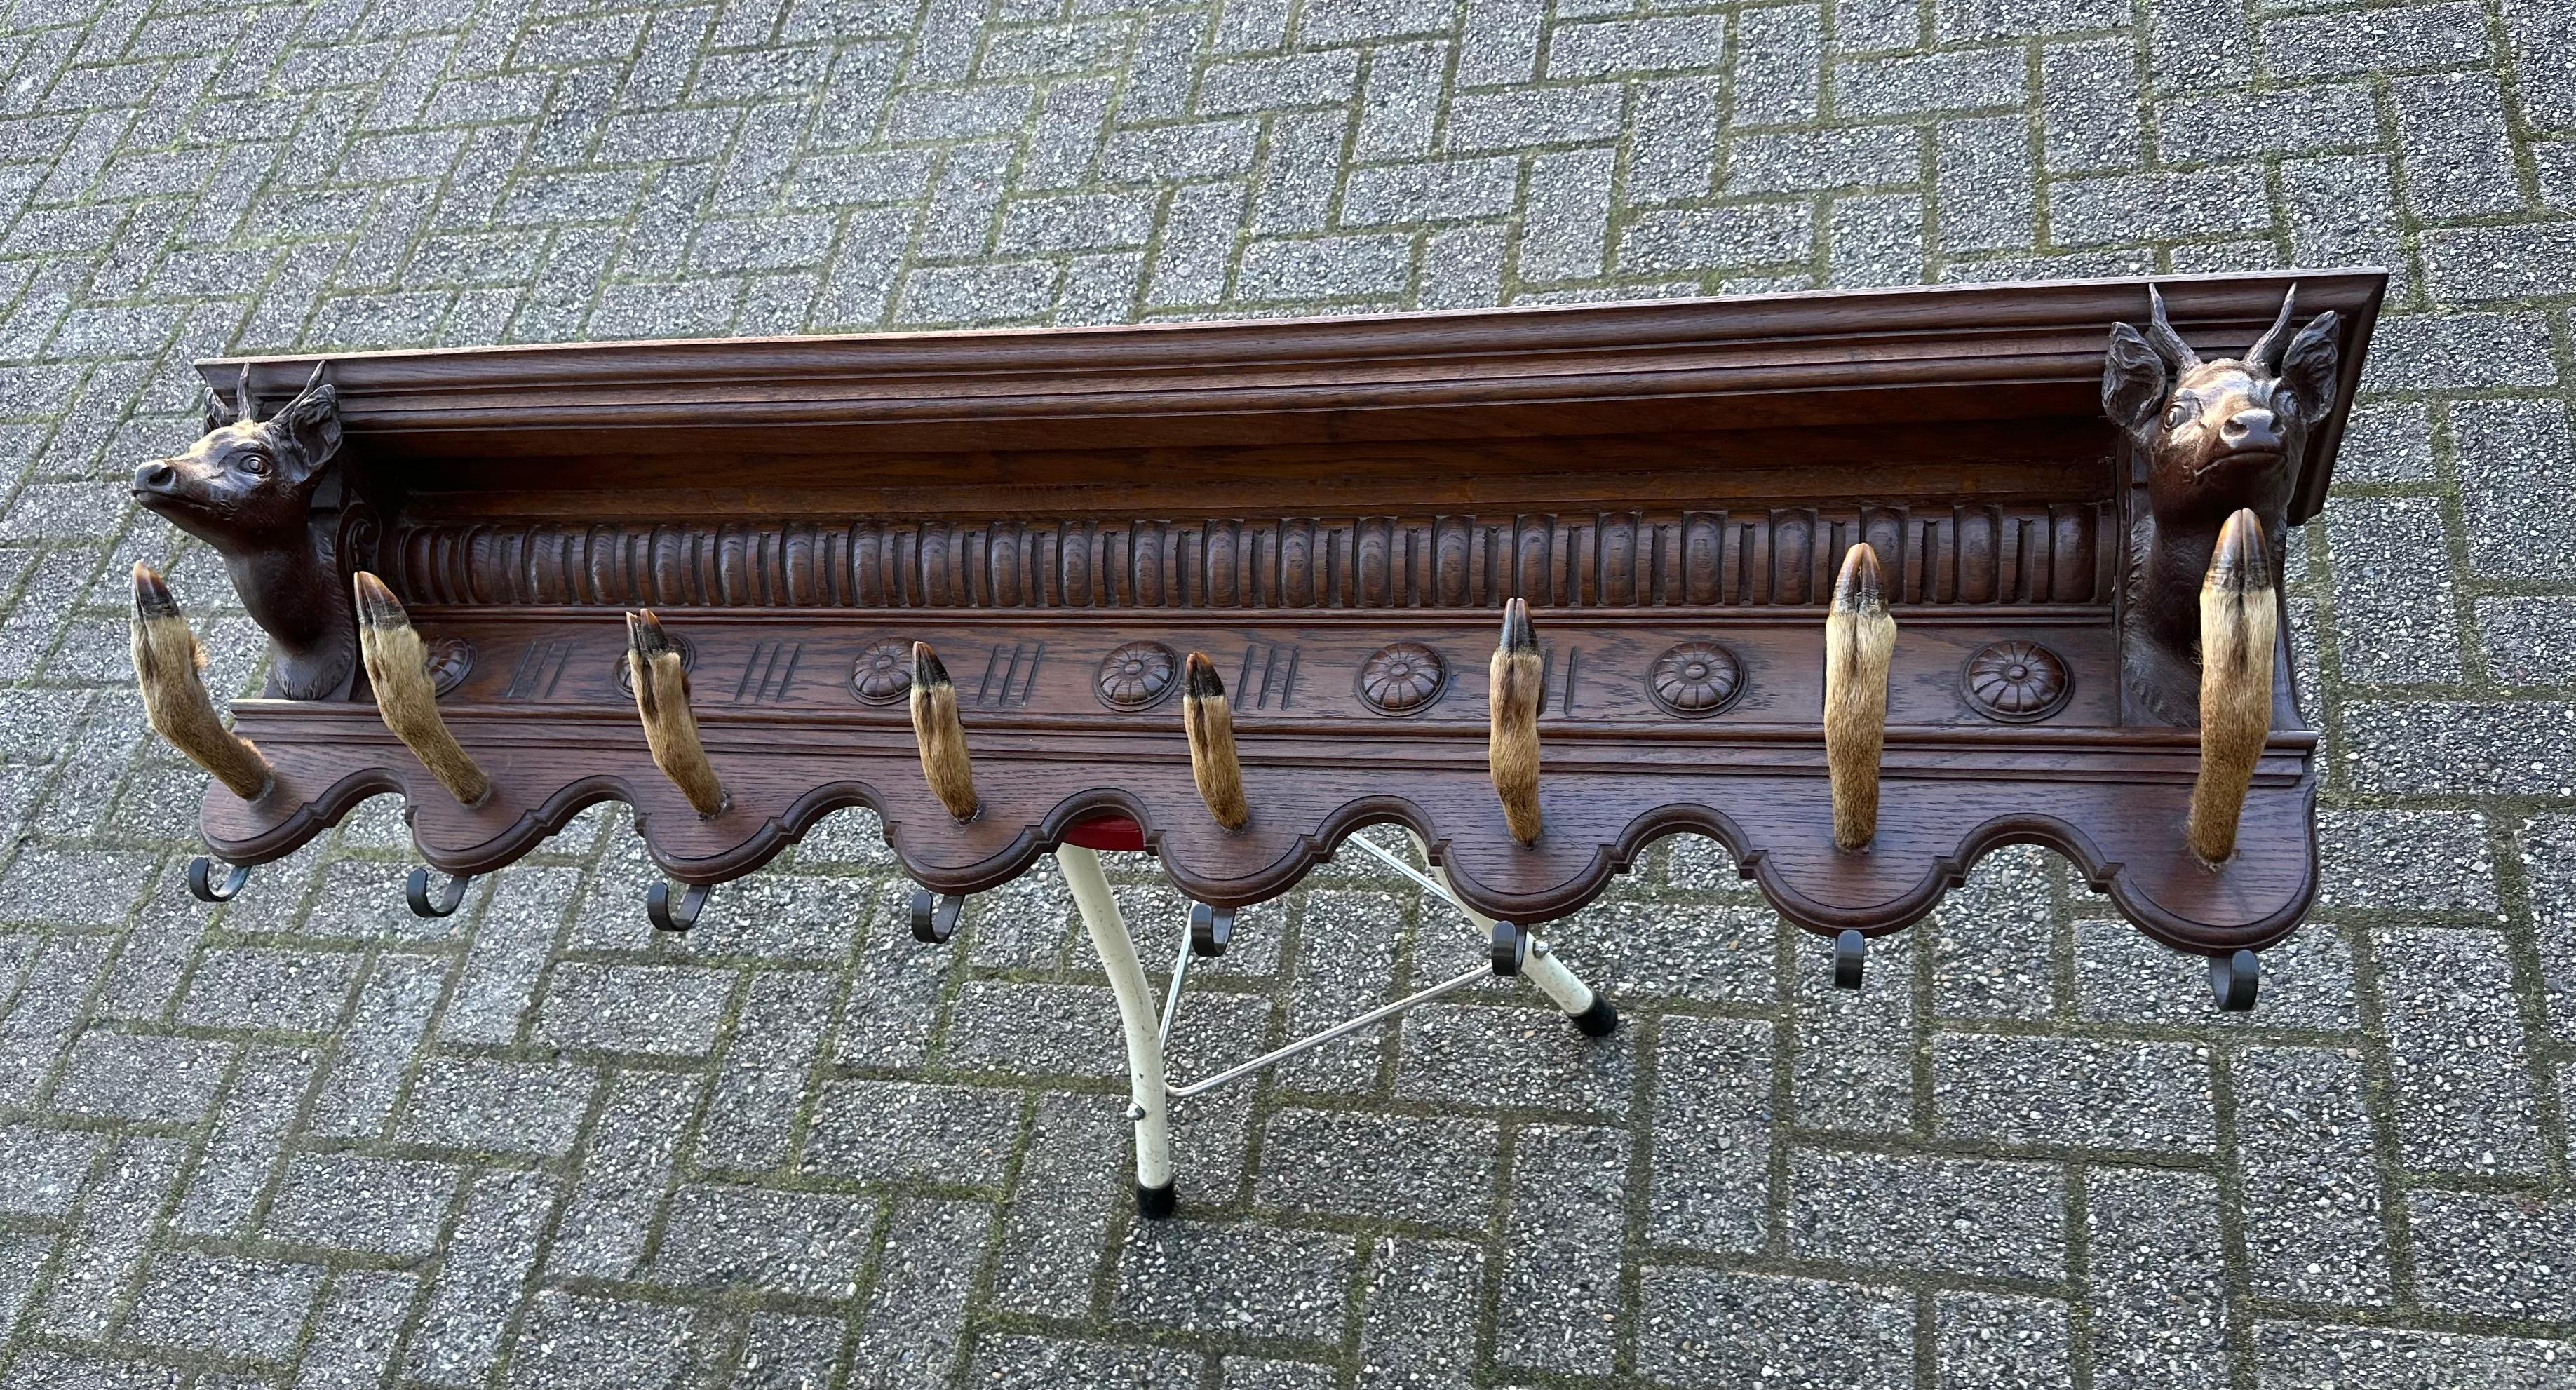 One of a kind coat-rack with hand carved oakwood deer heads.

With hand carved items being one of our favourite, we are always thrilled to find rare hand carved antiques. Especially ones that we have never seen before and that are unique. So we